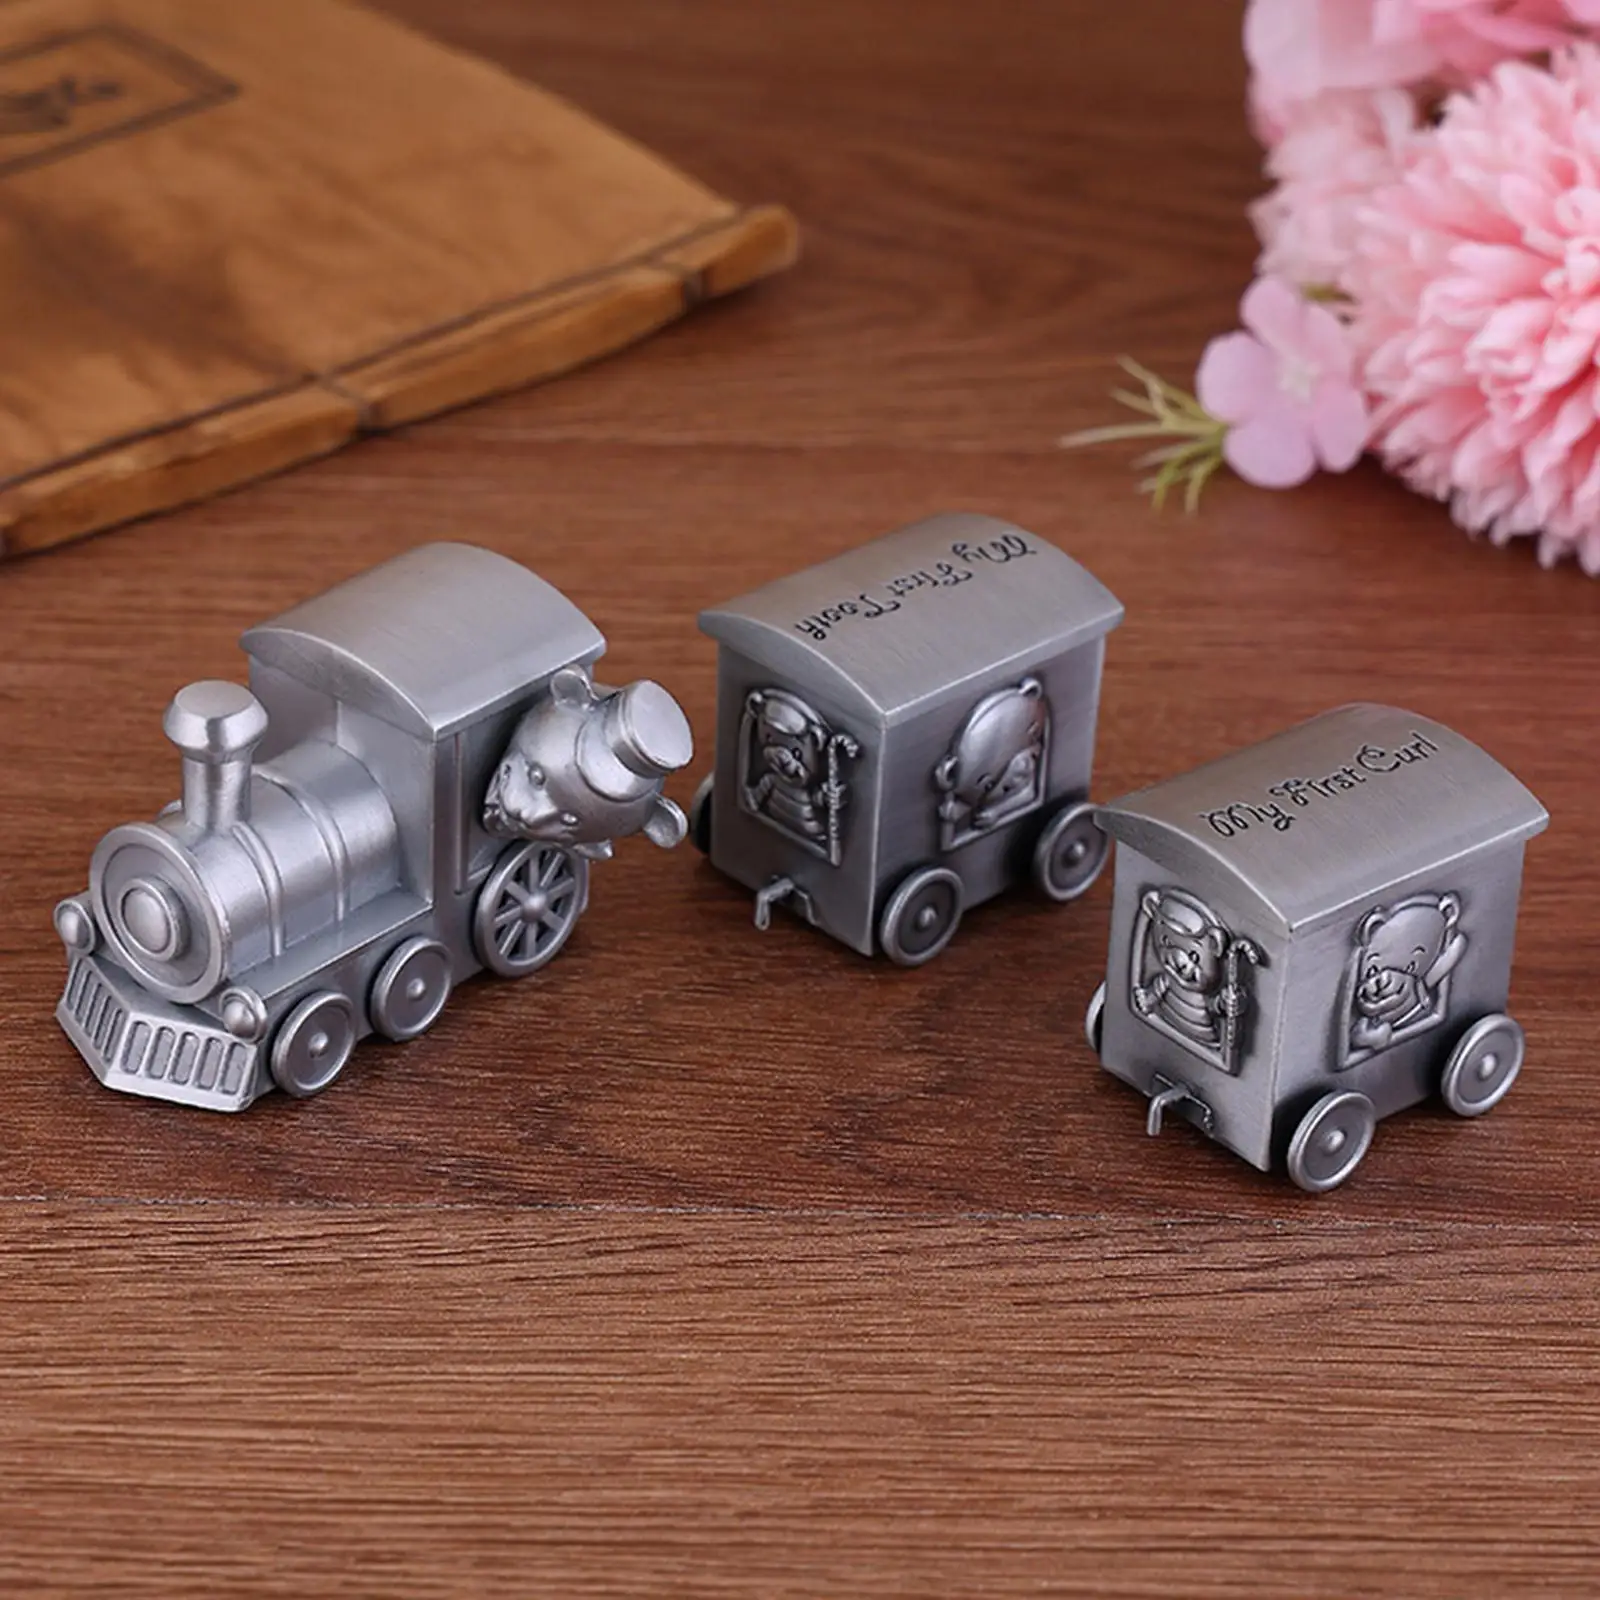 Train Tooth Holder Holder Children Growth Witness Saver Box Baby Collections Box for Baby Shower Nusery Decor Birthday Gift